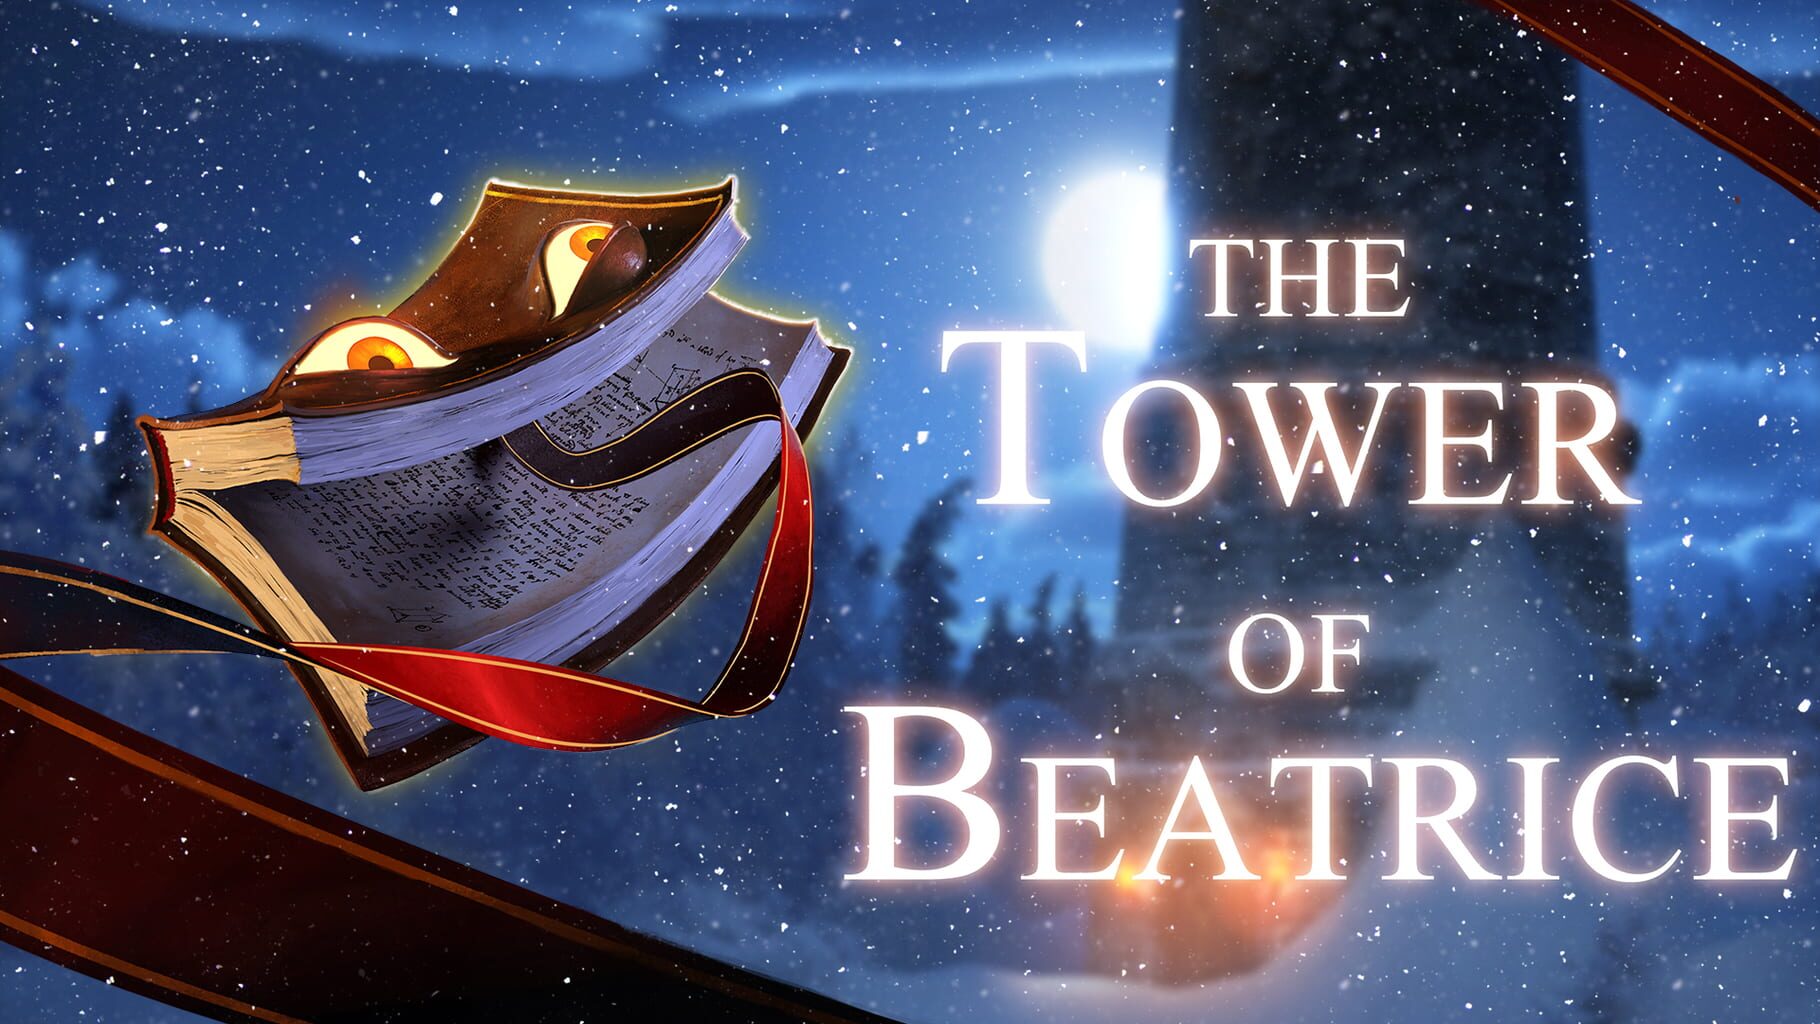 The Tower of Beatrice artwork